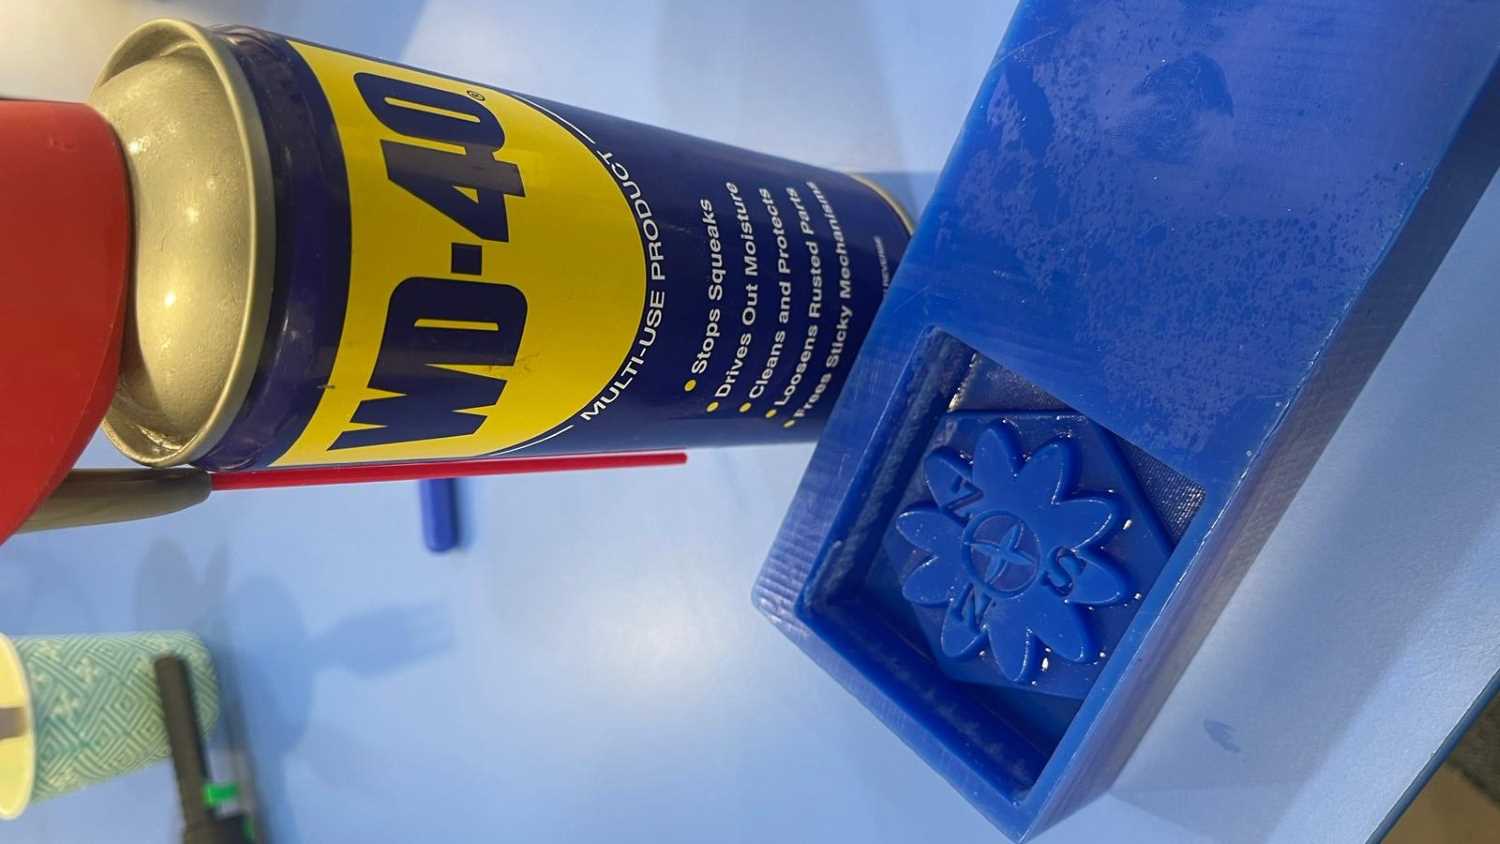 WD40 on the master mold